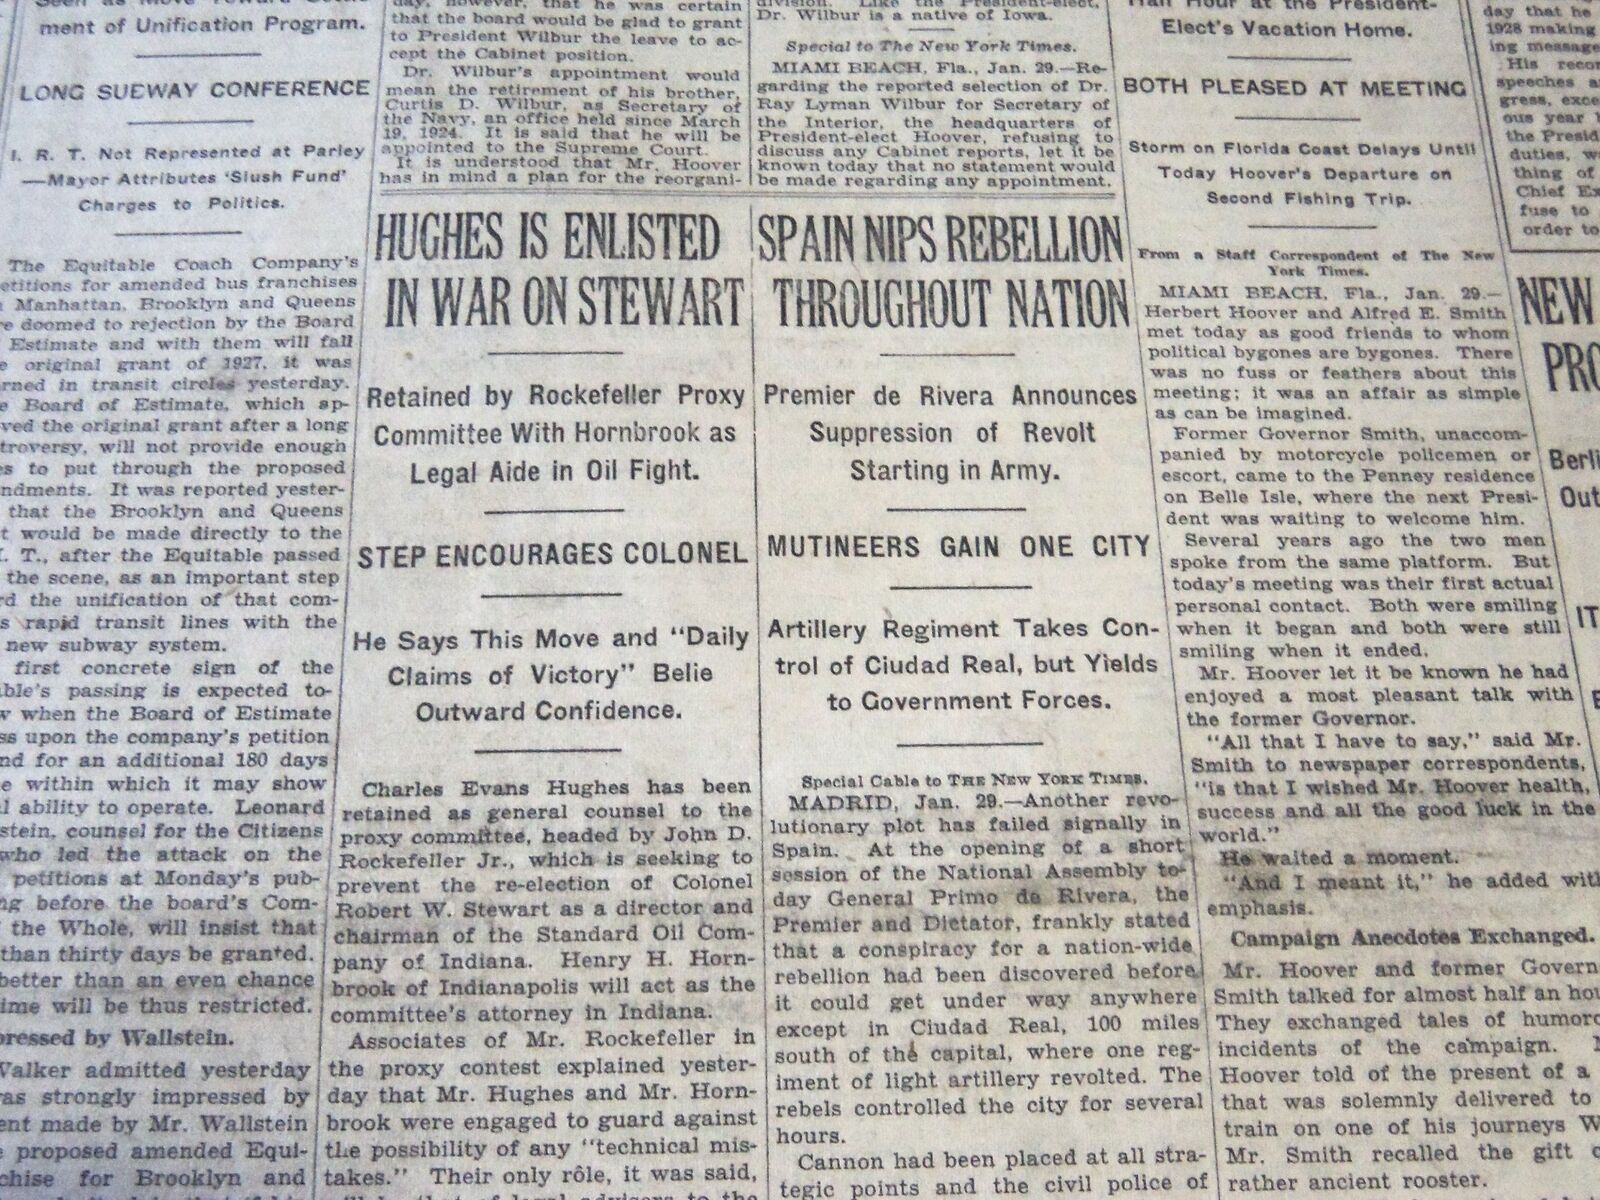 1929 JANUARY 30 NEW YORK TIMES - SPAIN NIPS REBELLION THROUGHOUT NATION- NT 6632